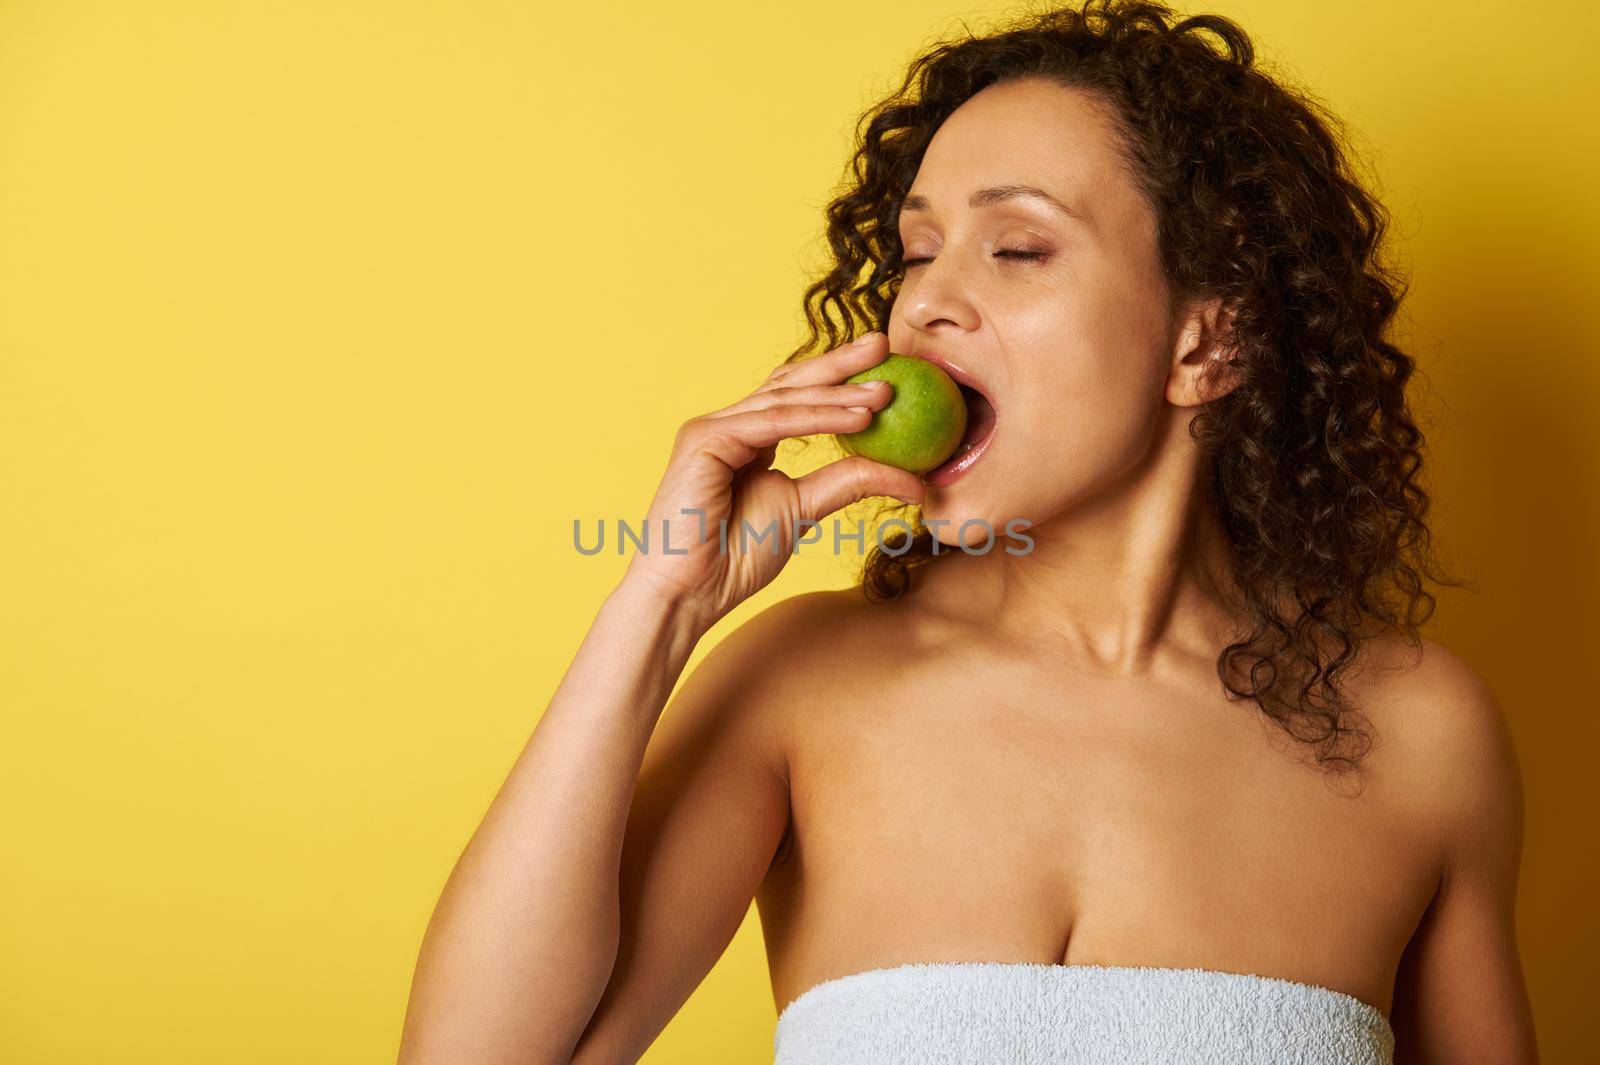 A curly-haired swarthy woman bites a green apple while standing on a yellow background by artgf